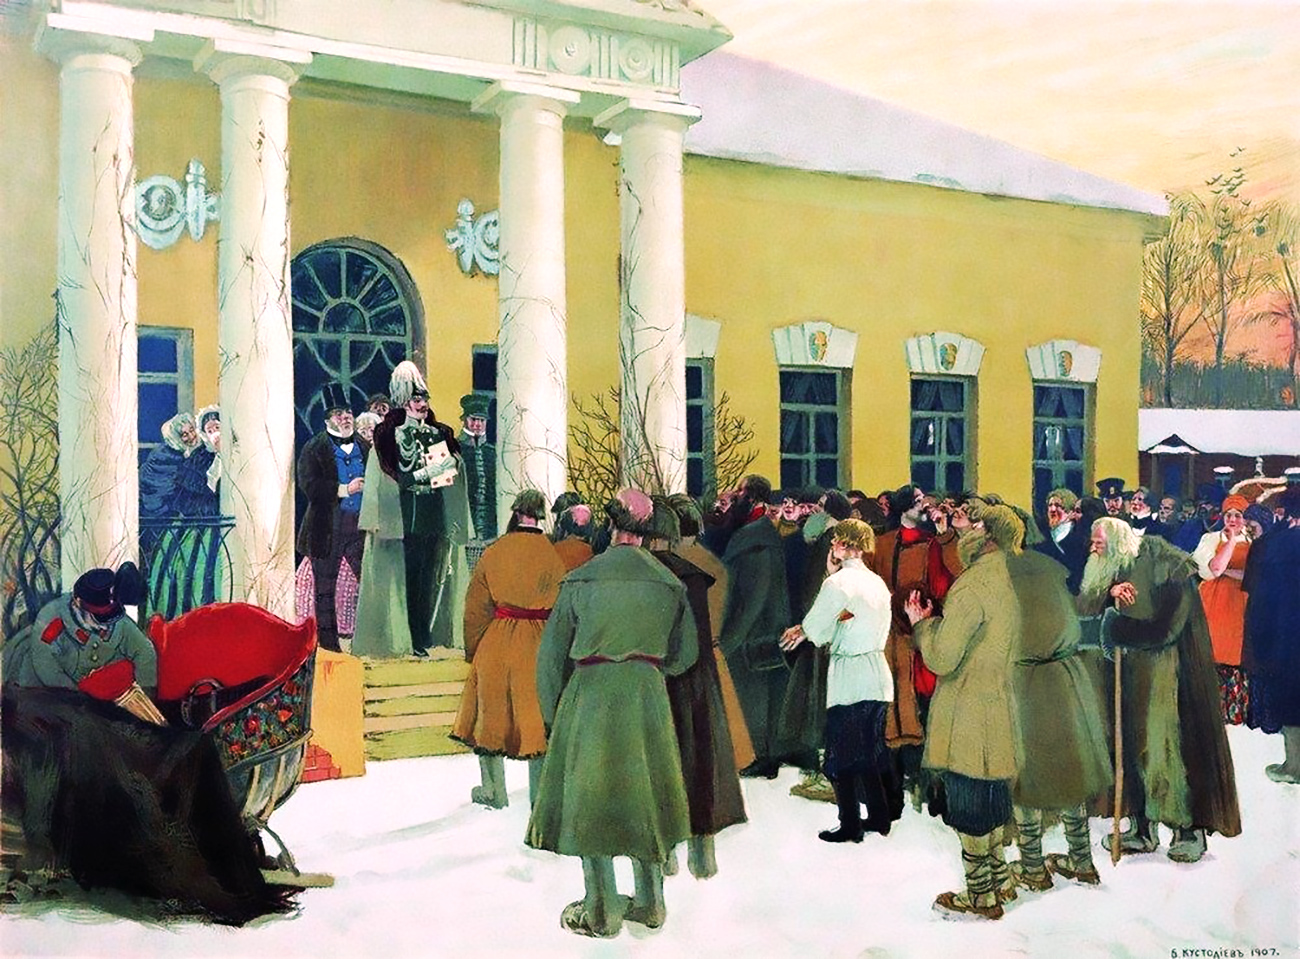 Liberation of peasants by Kustodiev. 1907. / Source: Illustrated Russian history